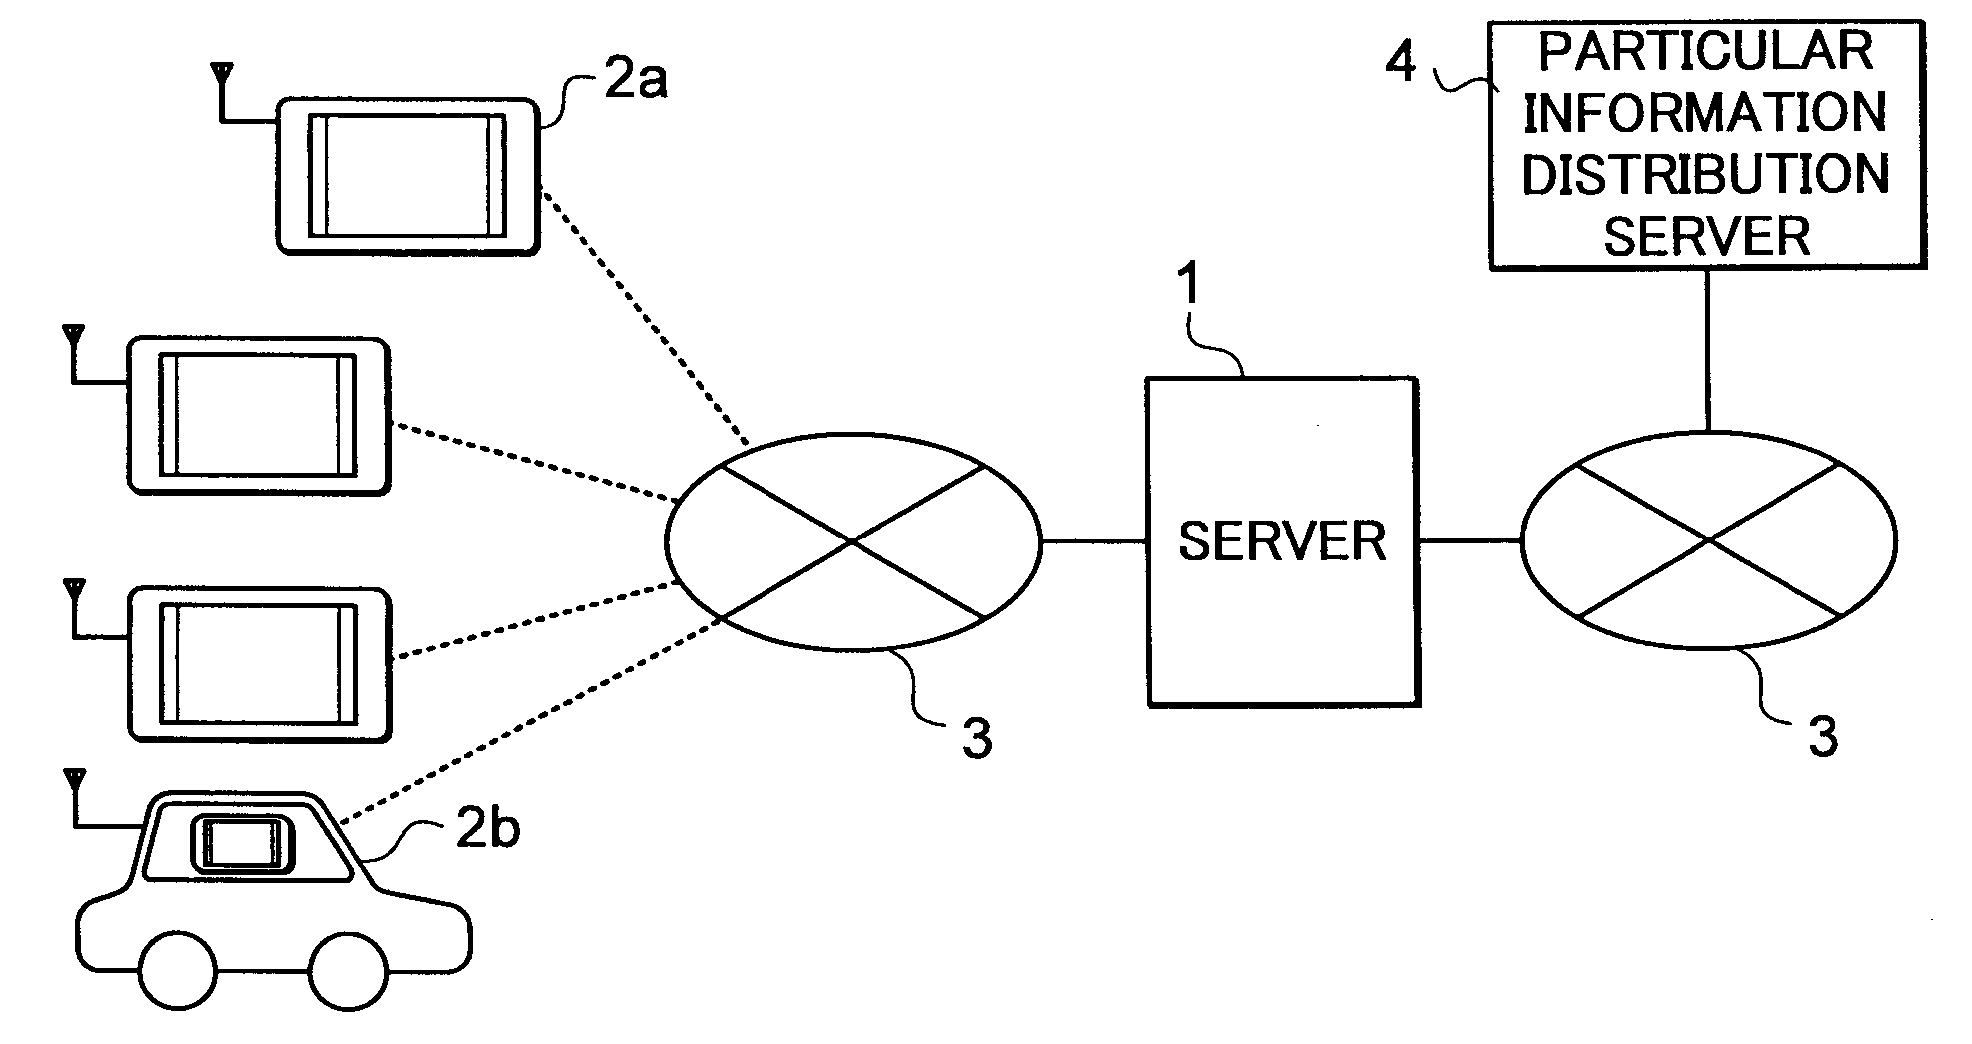 Server, vehicle-mounted navigation apparatus, vehicle employing these, and particular information distribution system related to these